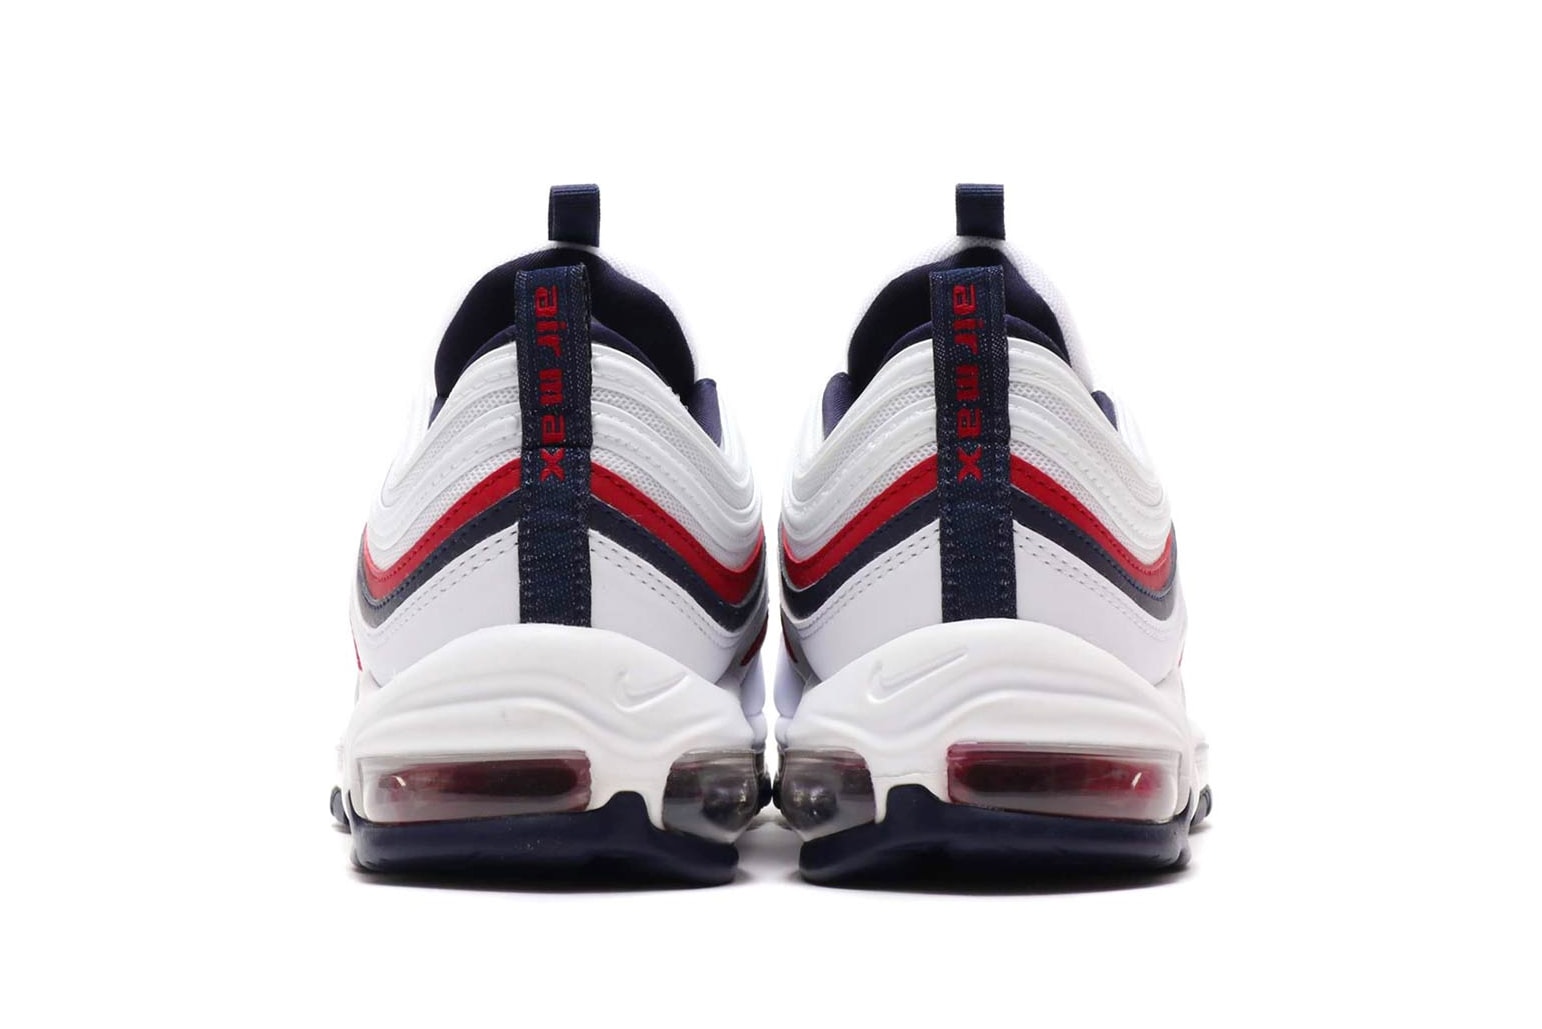 Nike Air Max 97 in "Red Crush" Sneaker White Red Womens Size Exclusive Navy Blue